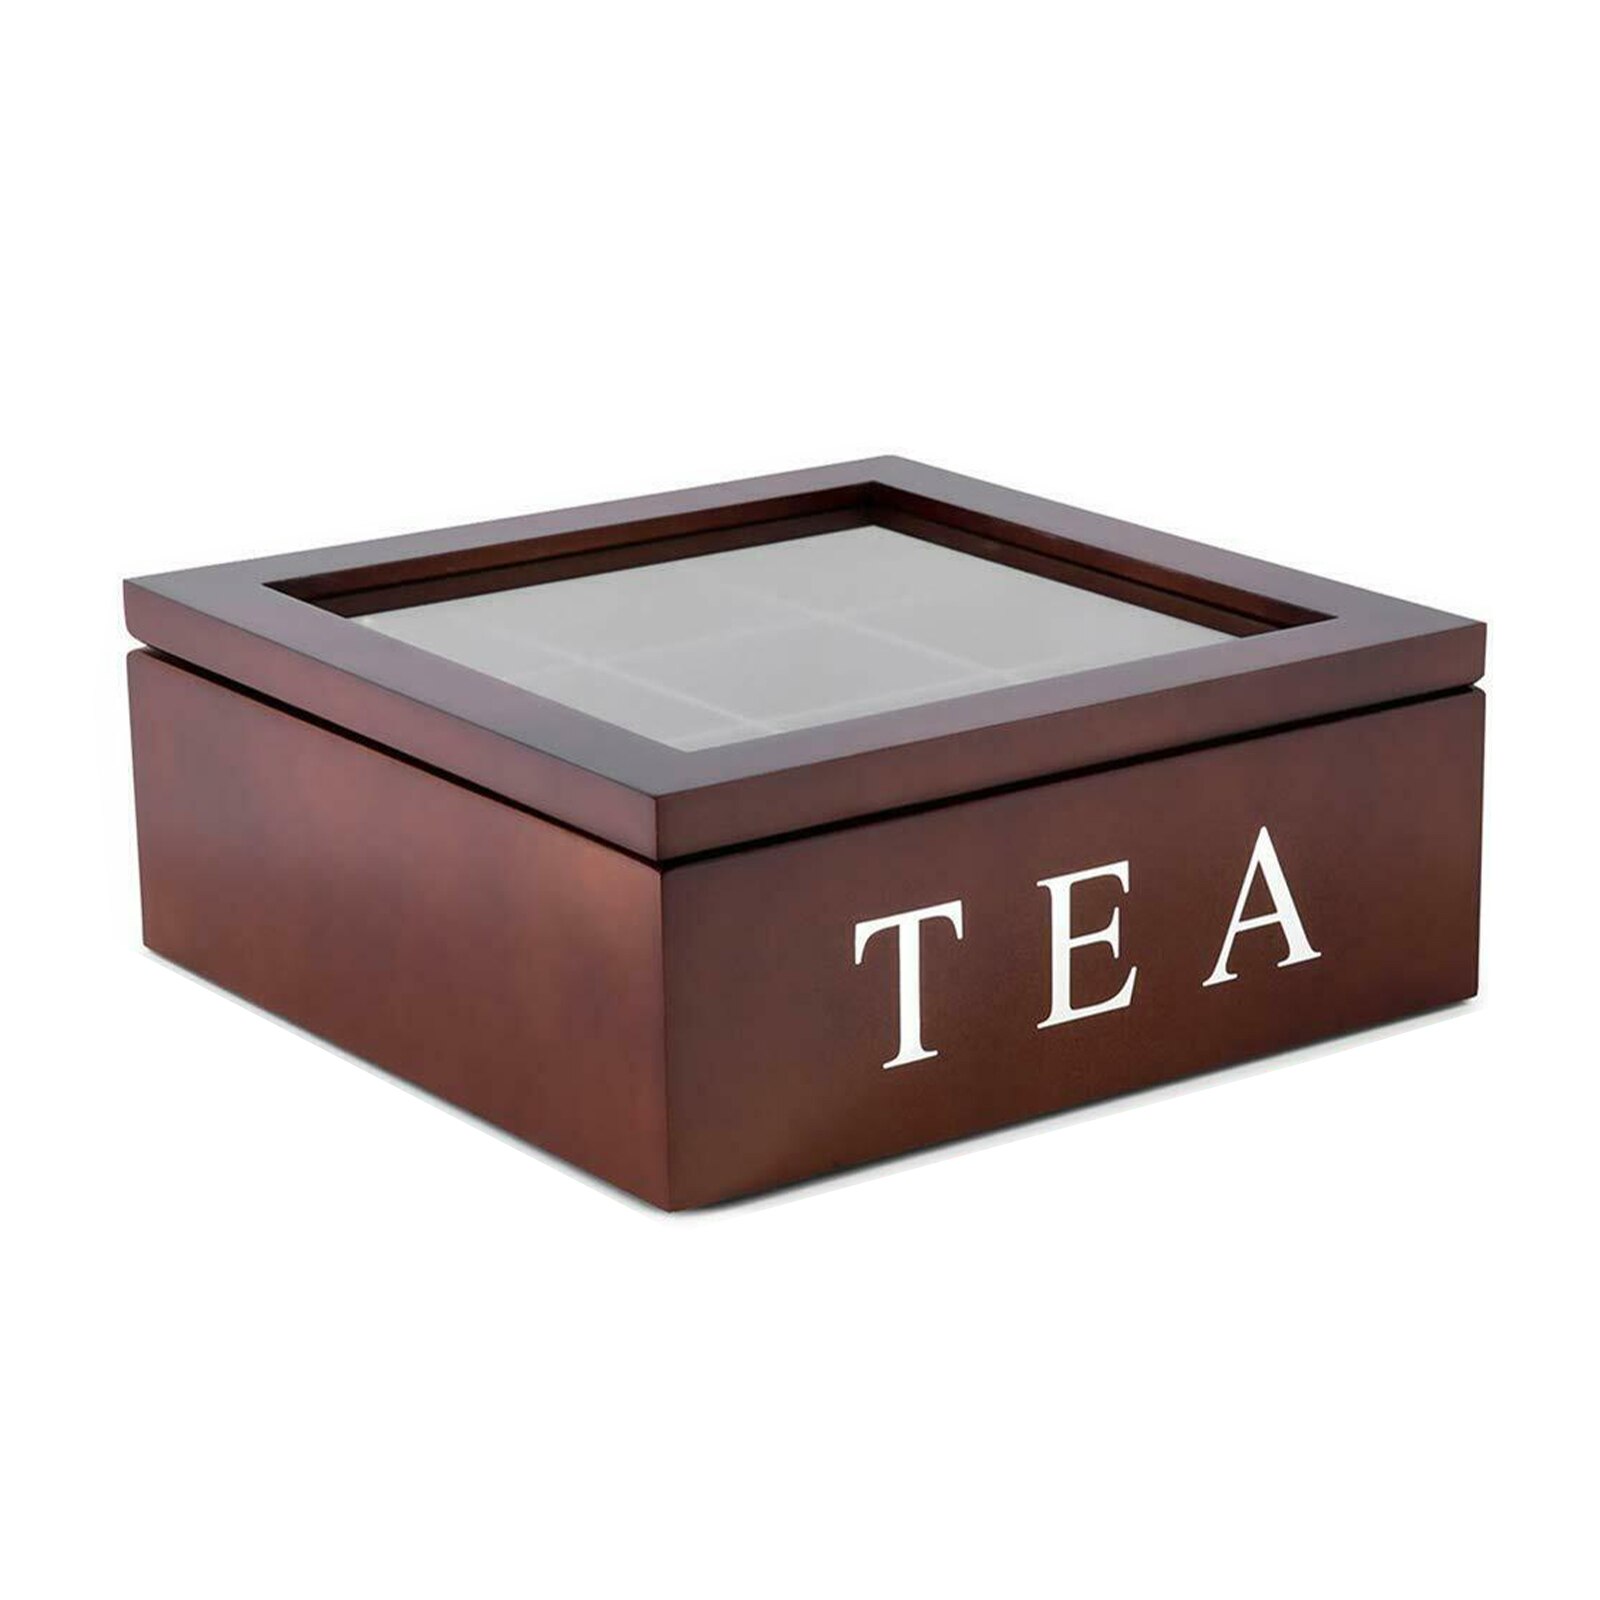 Wooden Tea Box With Lid 9-Compartment Retro Style Coffee Tea Bag Storage Holder Organizer For Kitchen Cabinets home Kitchen: C